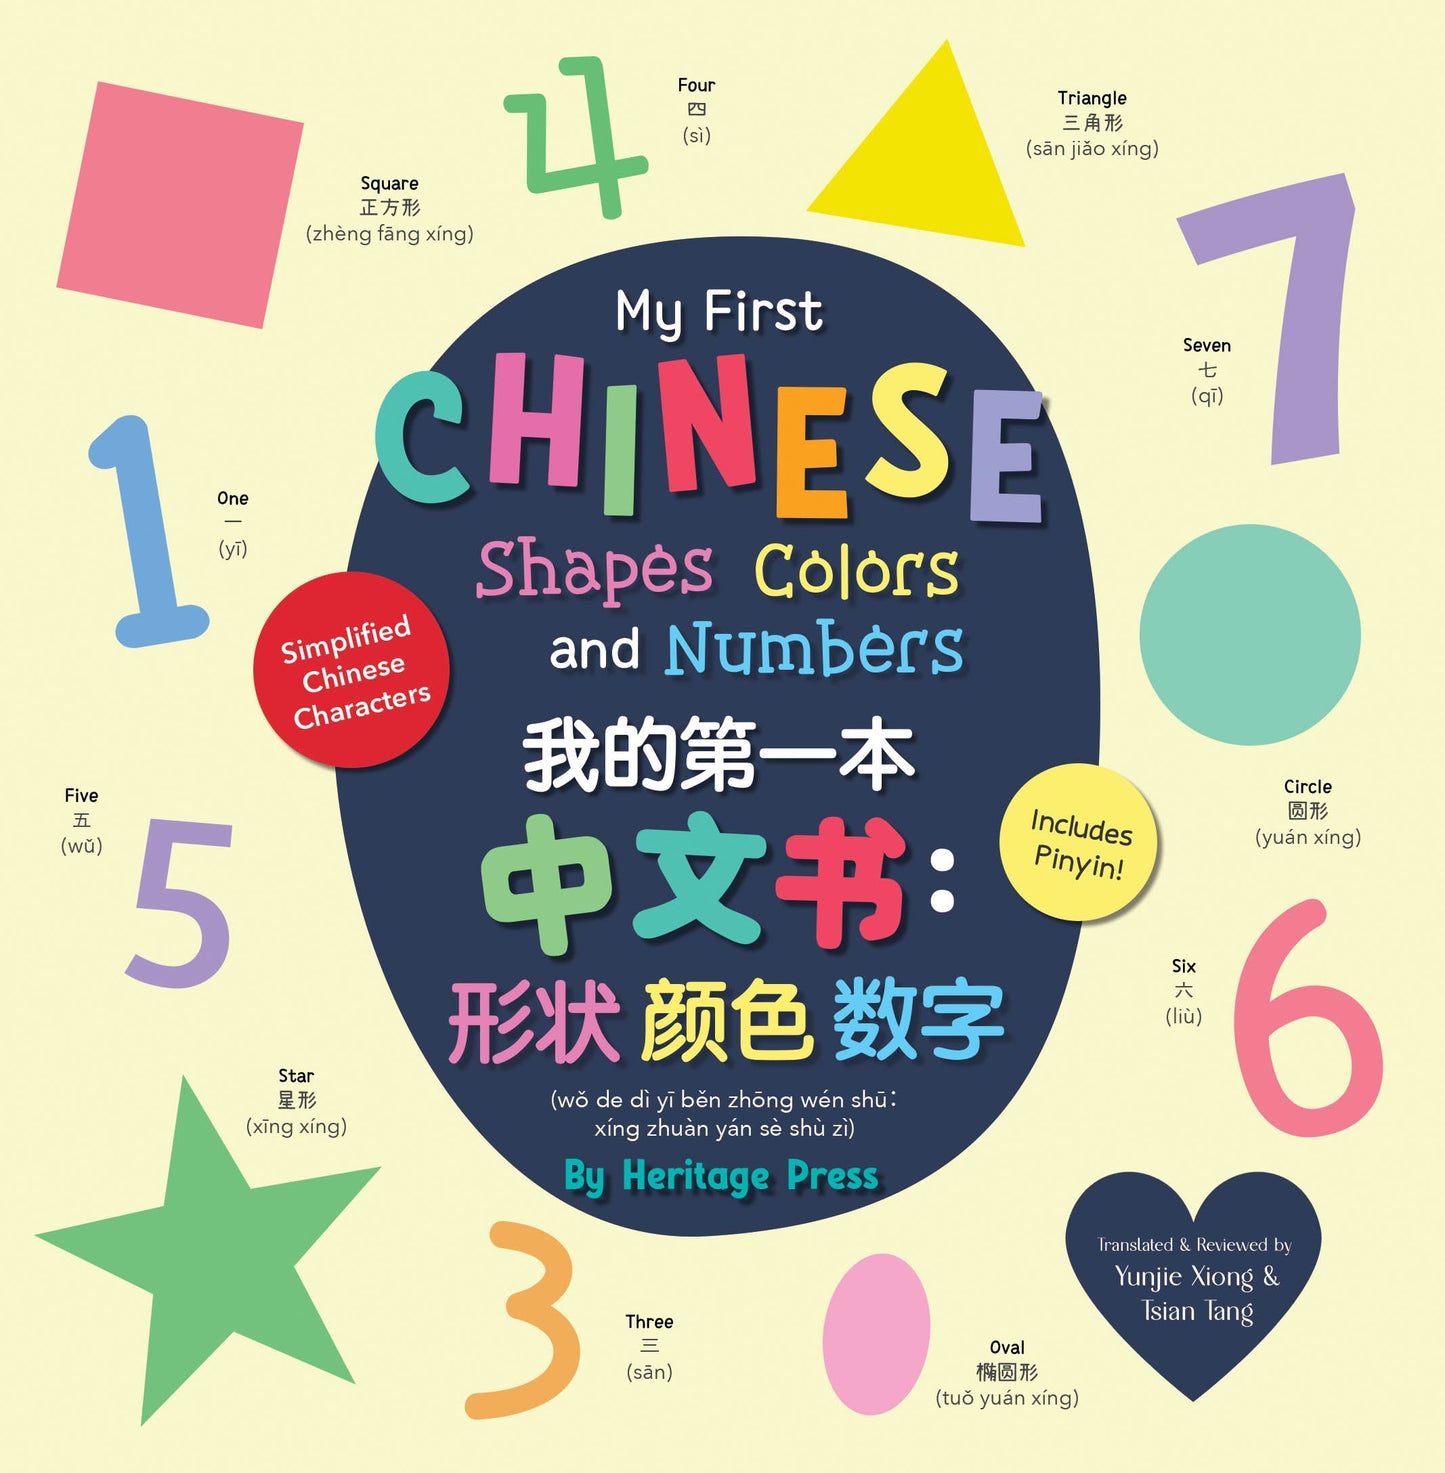 My First Chinese Shapes, Colors, and Numbers / 我的第一本 中文书:形状 顔色 数字 (AMZ)